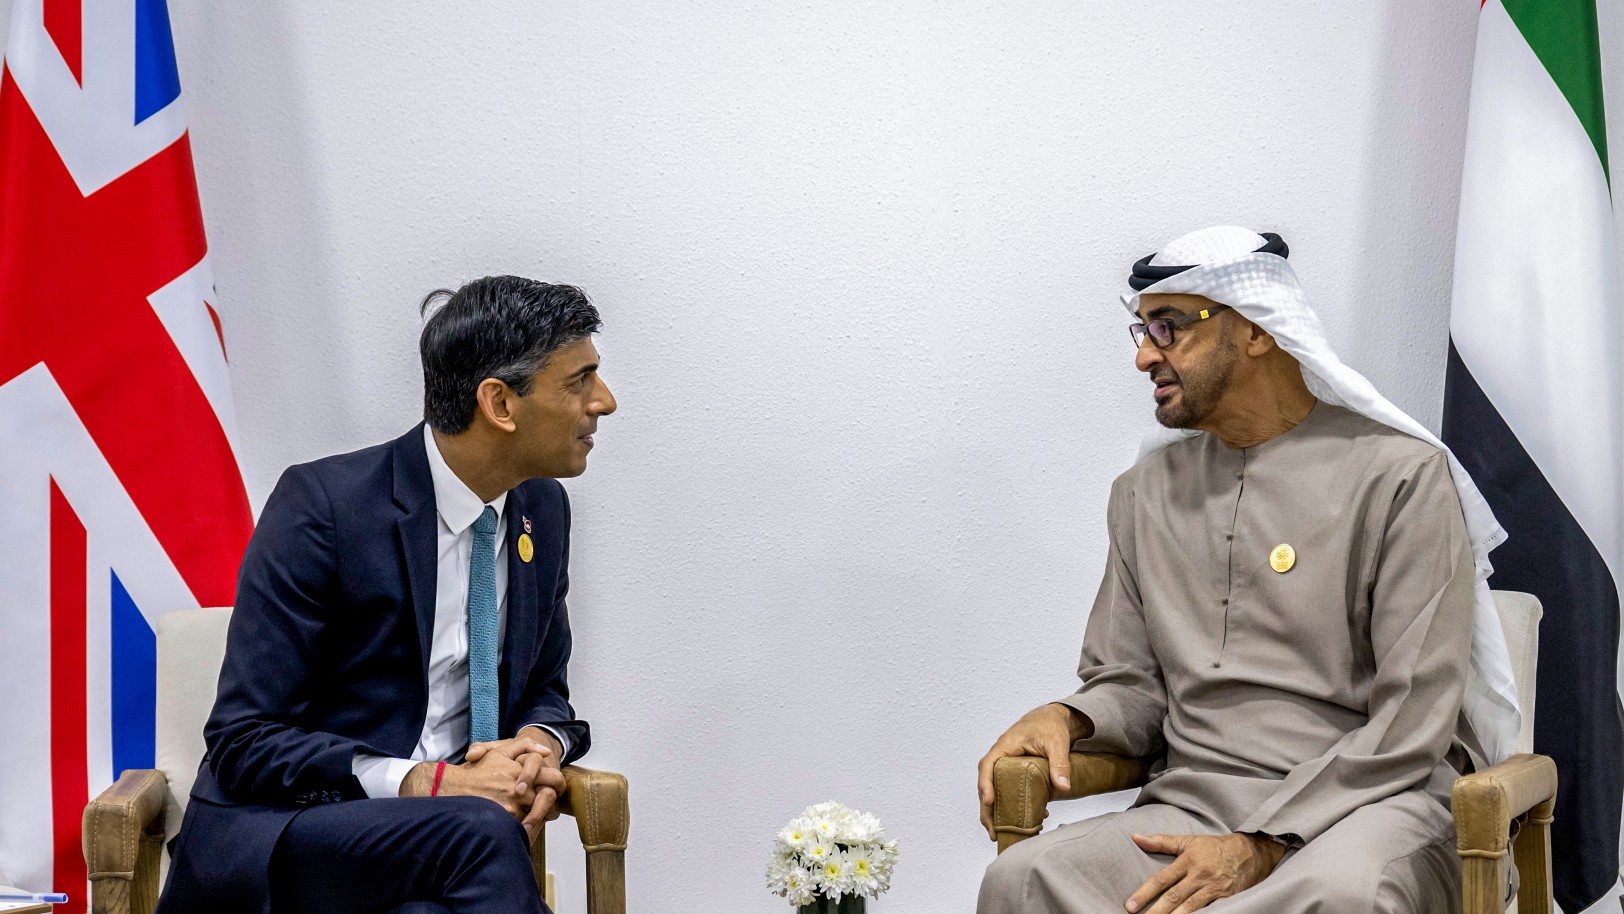 This handout image provided by the UAE Ministry Of Presidential Affairs shows UAE President Sheikh Mohamed bin Zayed al-Nahyan (R) meeting with Britain's Prime Minister Rishi Sunak on the sidelines of the COP27 climate conference in Egypt's Red Sea resort city of Sharm el-Sheikh on November 7, 2022. Hamad AL-KAABI / UAE's Ministry of Presidential Affairs / AFP